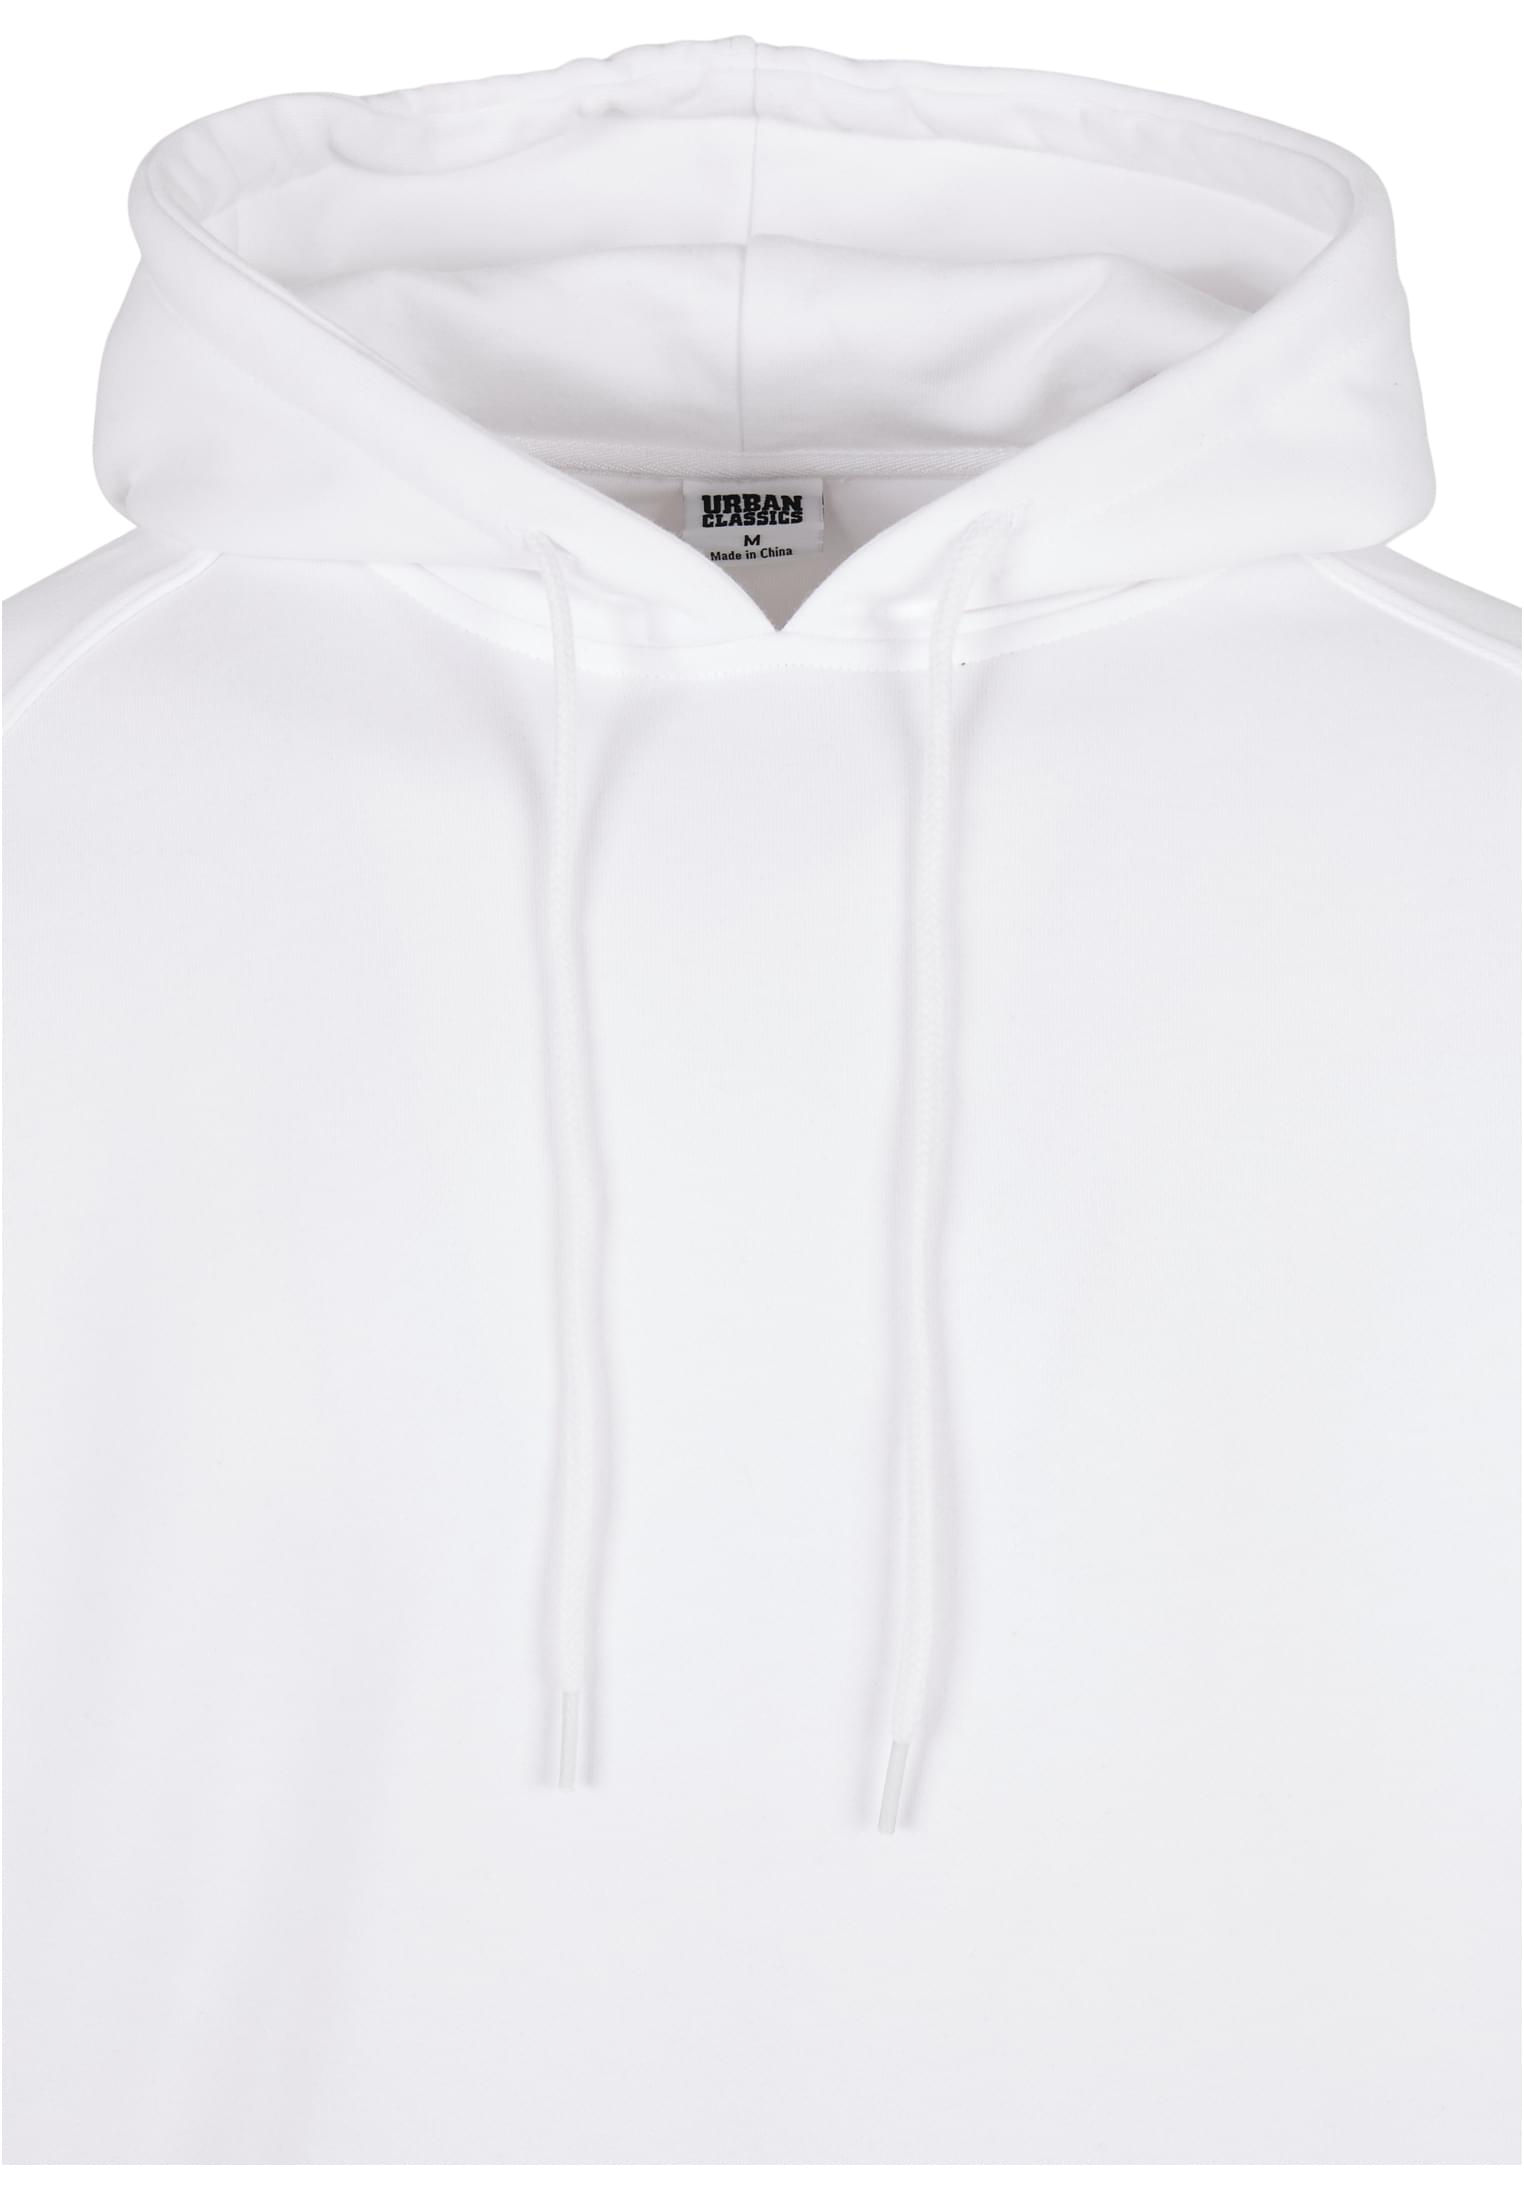 Plus Size Blank Hoody in Farbe white